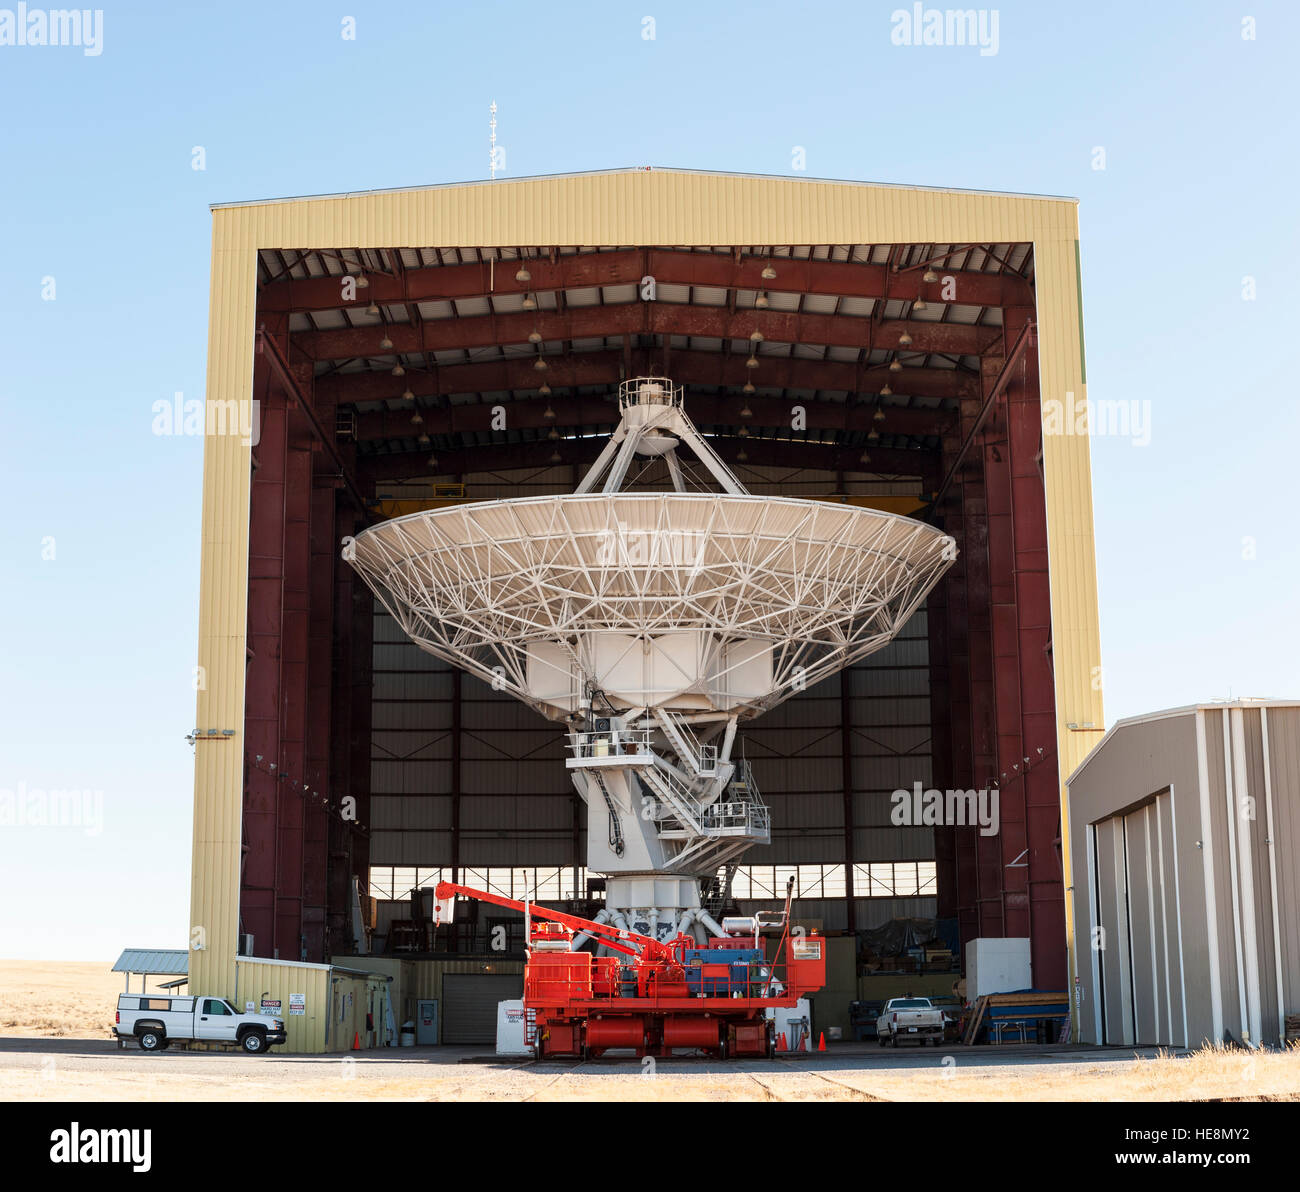 Very Large Array hangar with a radio telescope being repaired / going through maintenance, New Mexico, NM, USA. Stock Photo